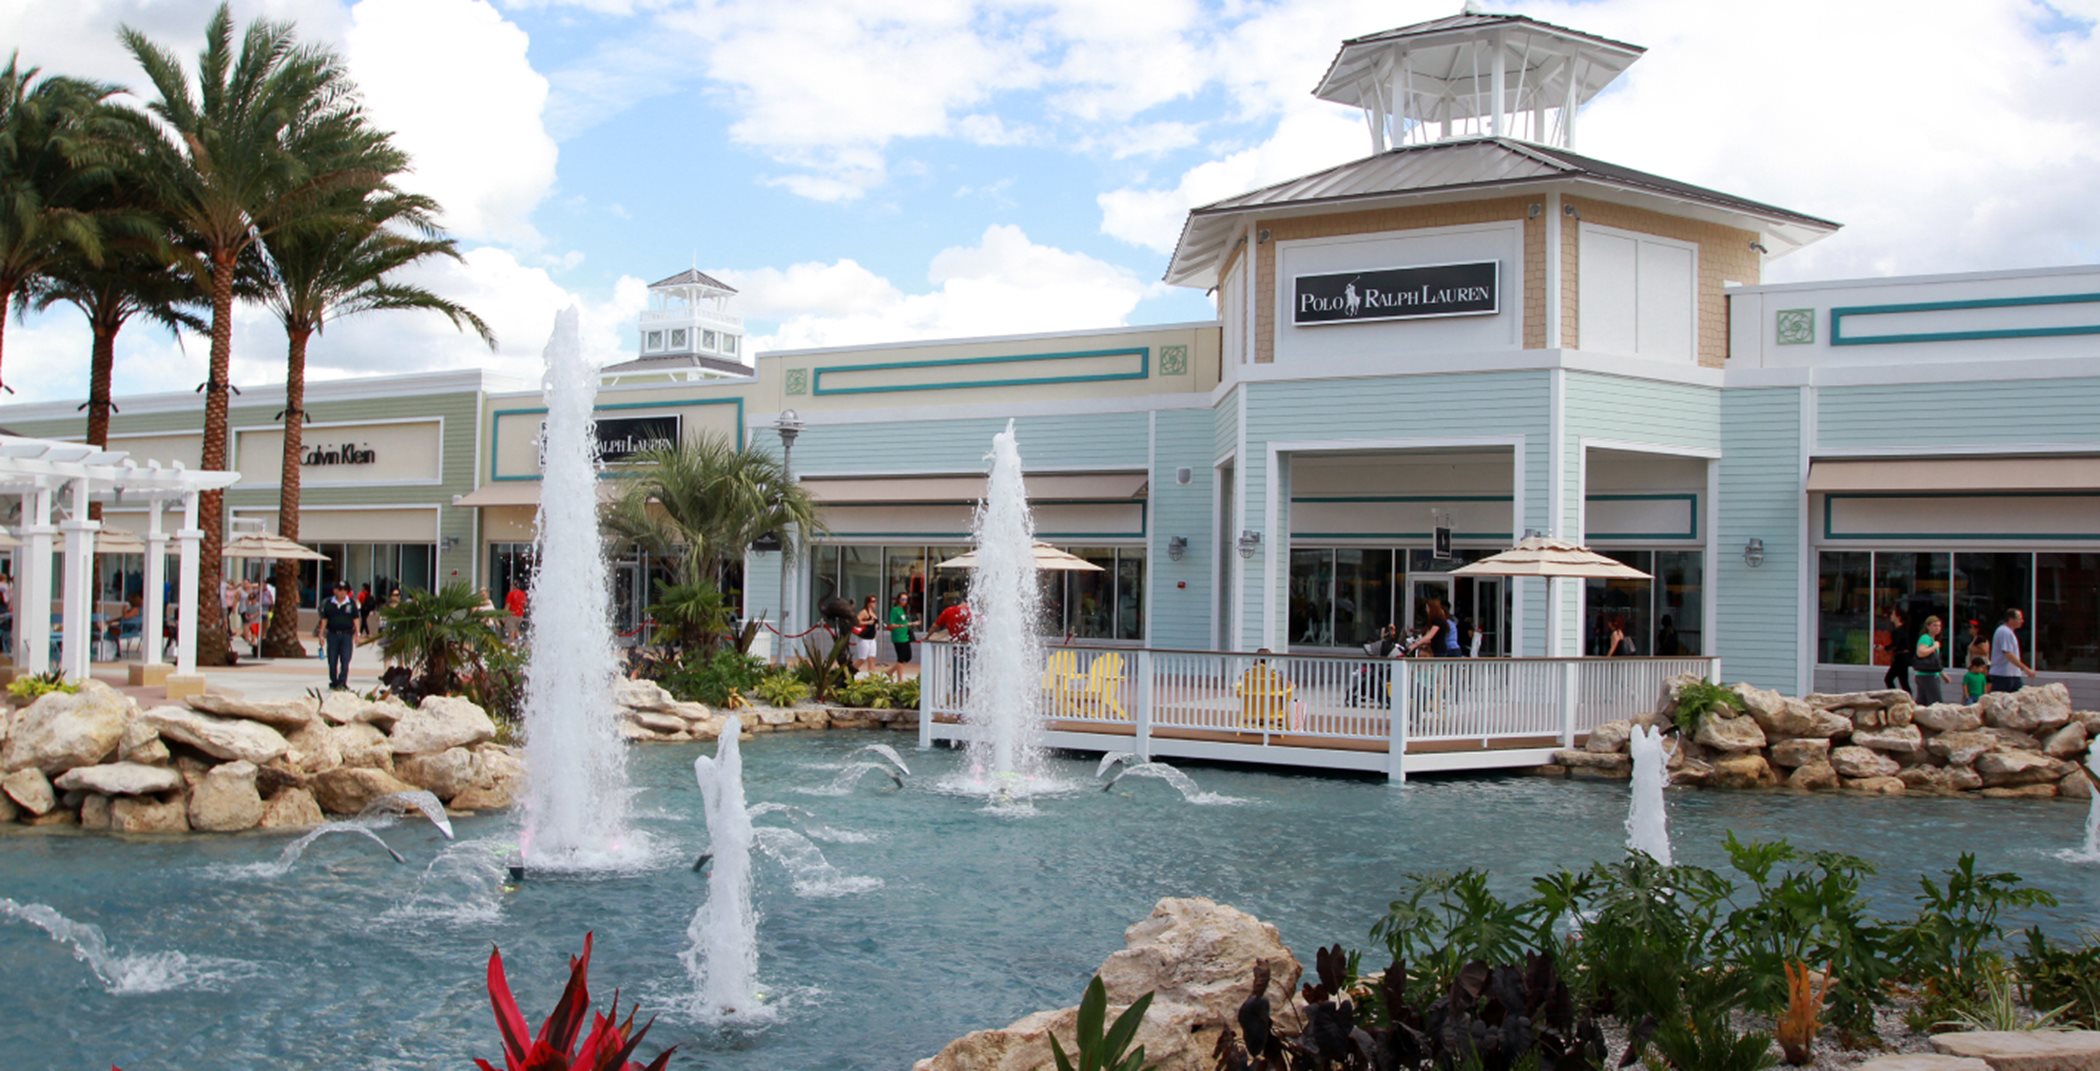 Exterior of Tampa Premium Outlets